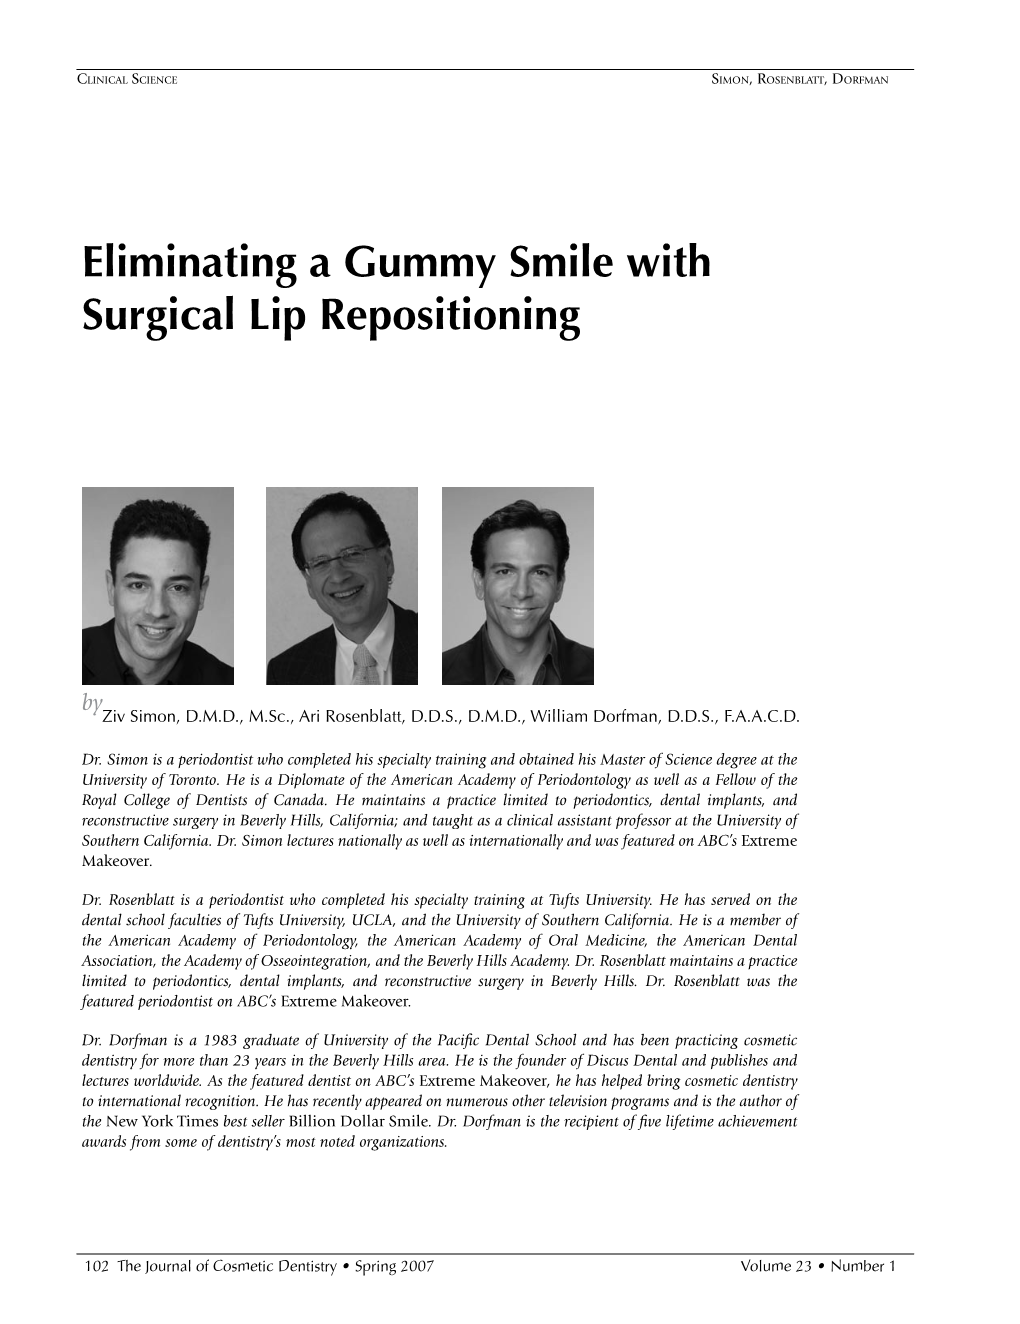 Eliminating a Gummy Smile with Surgical Lip Repositioning